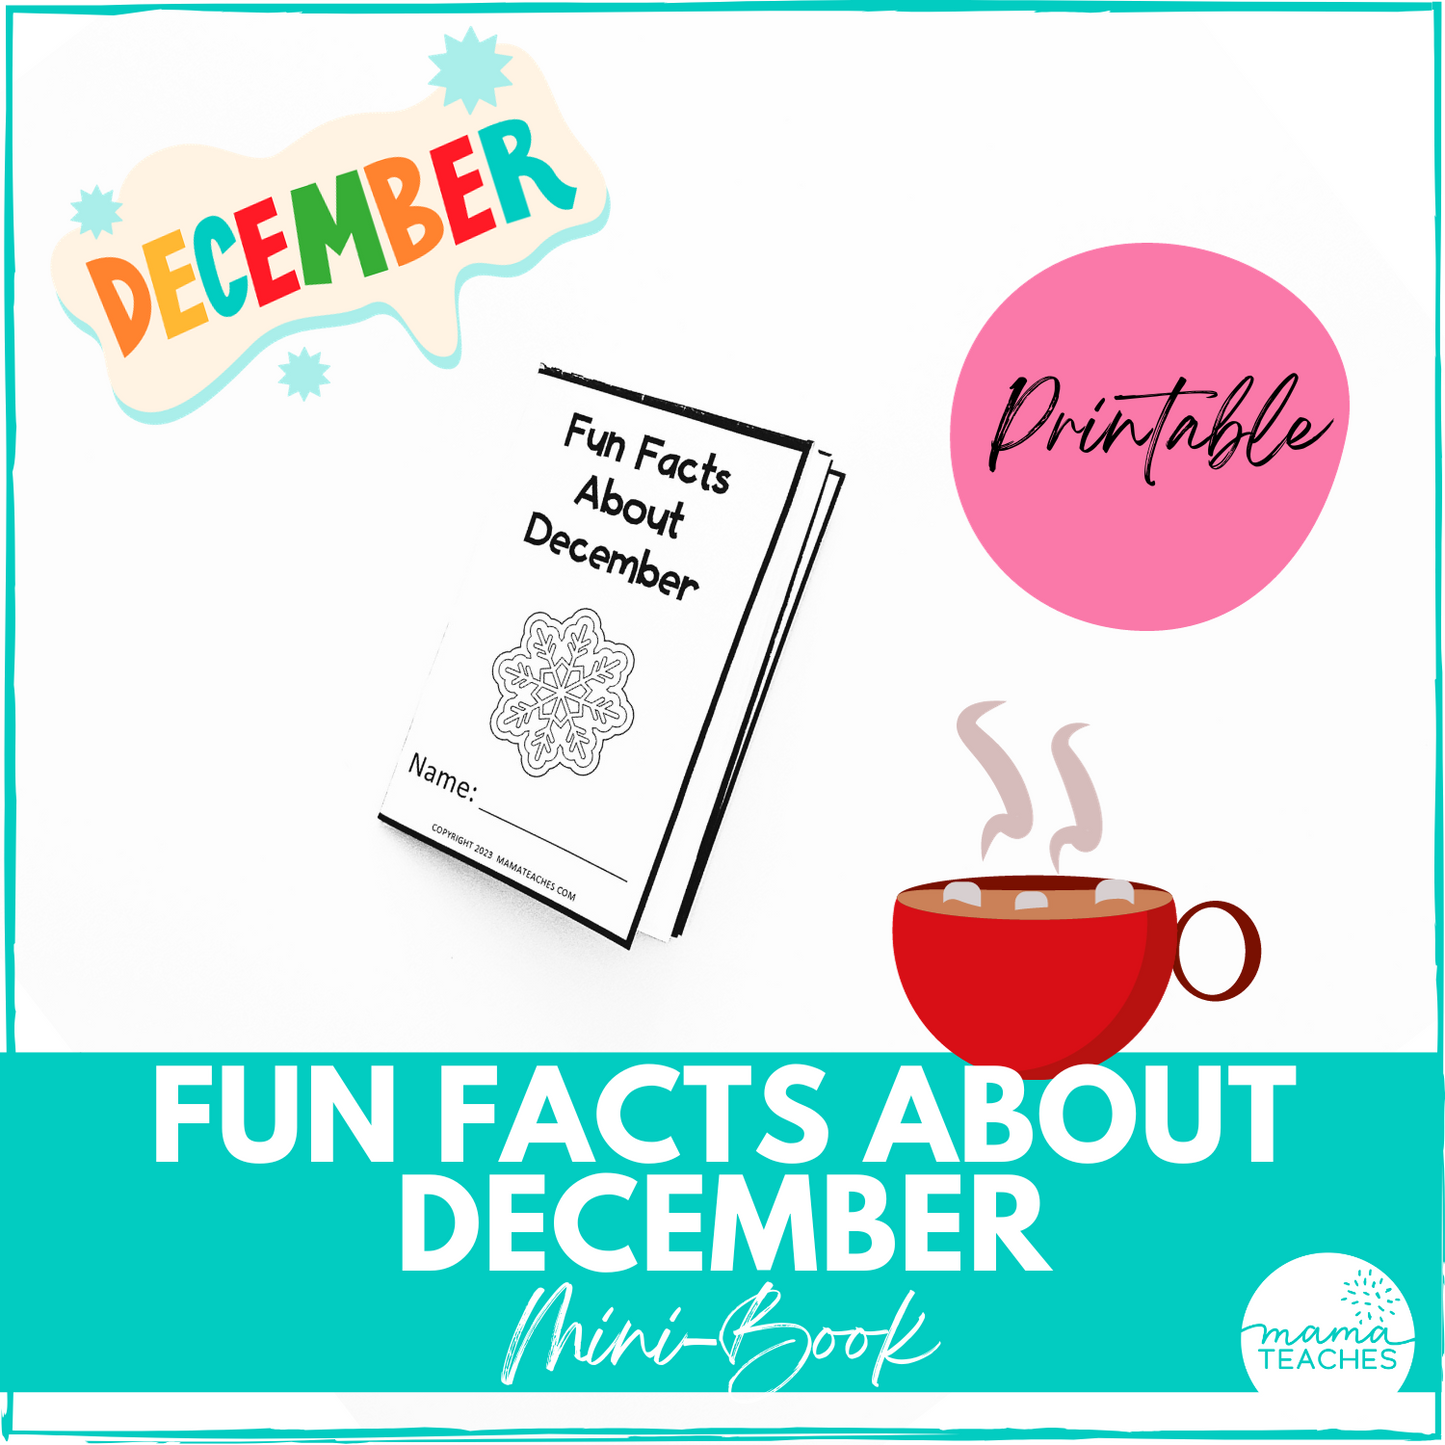 Fun Facts About December Mini-Book